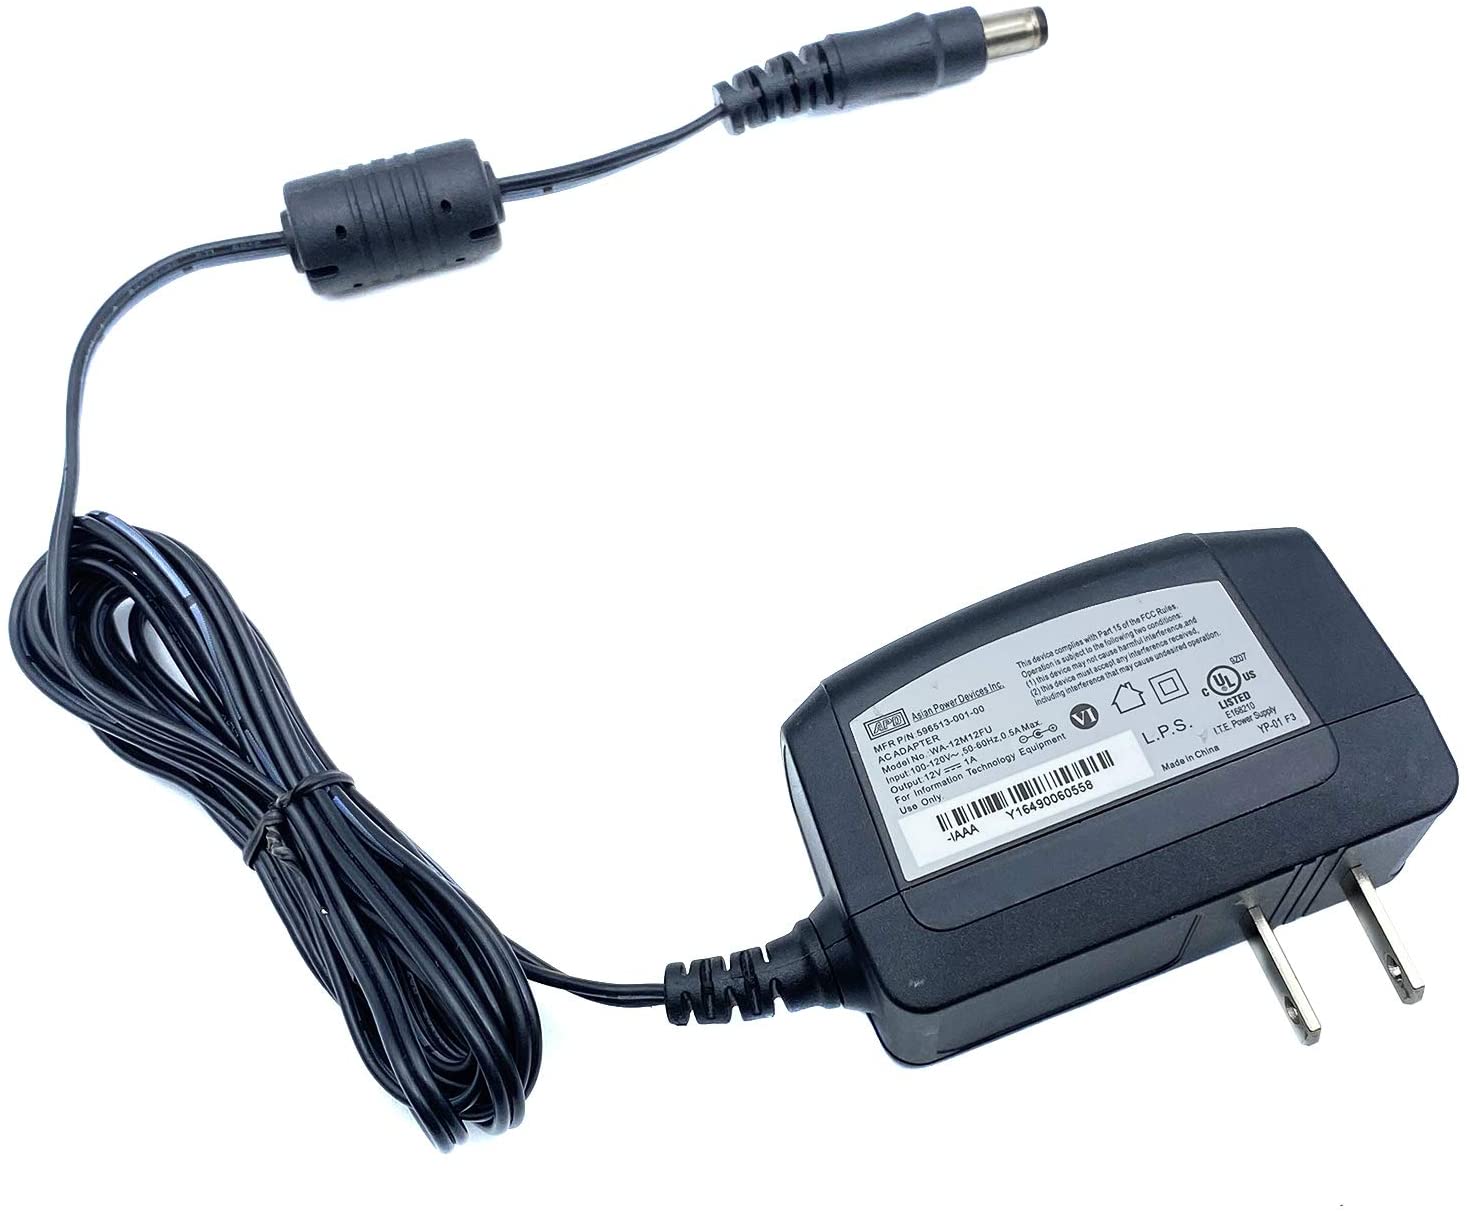 Genuine APD WA-12M12FU Power Supply Adapter 12V 1A Brand APD Input Voltage 12 Volts Current Rating 1 Amps Frequency Ra